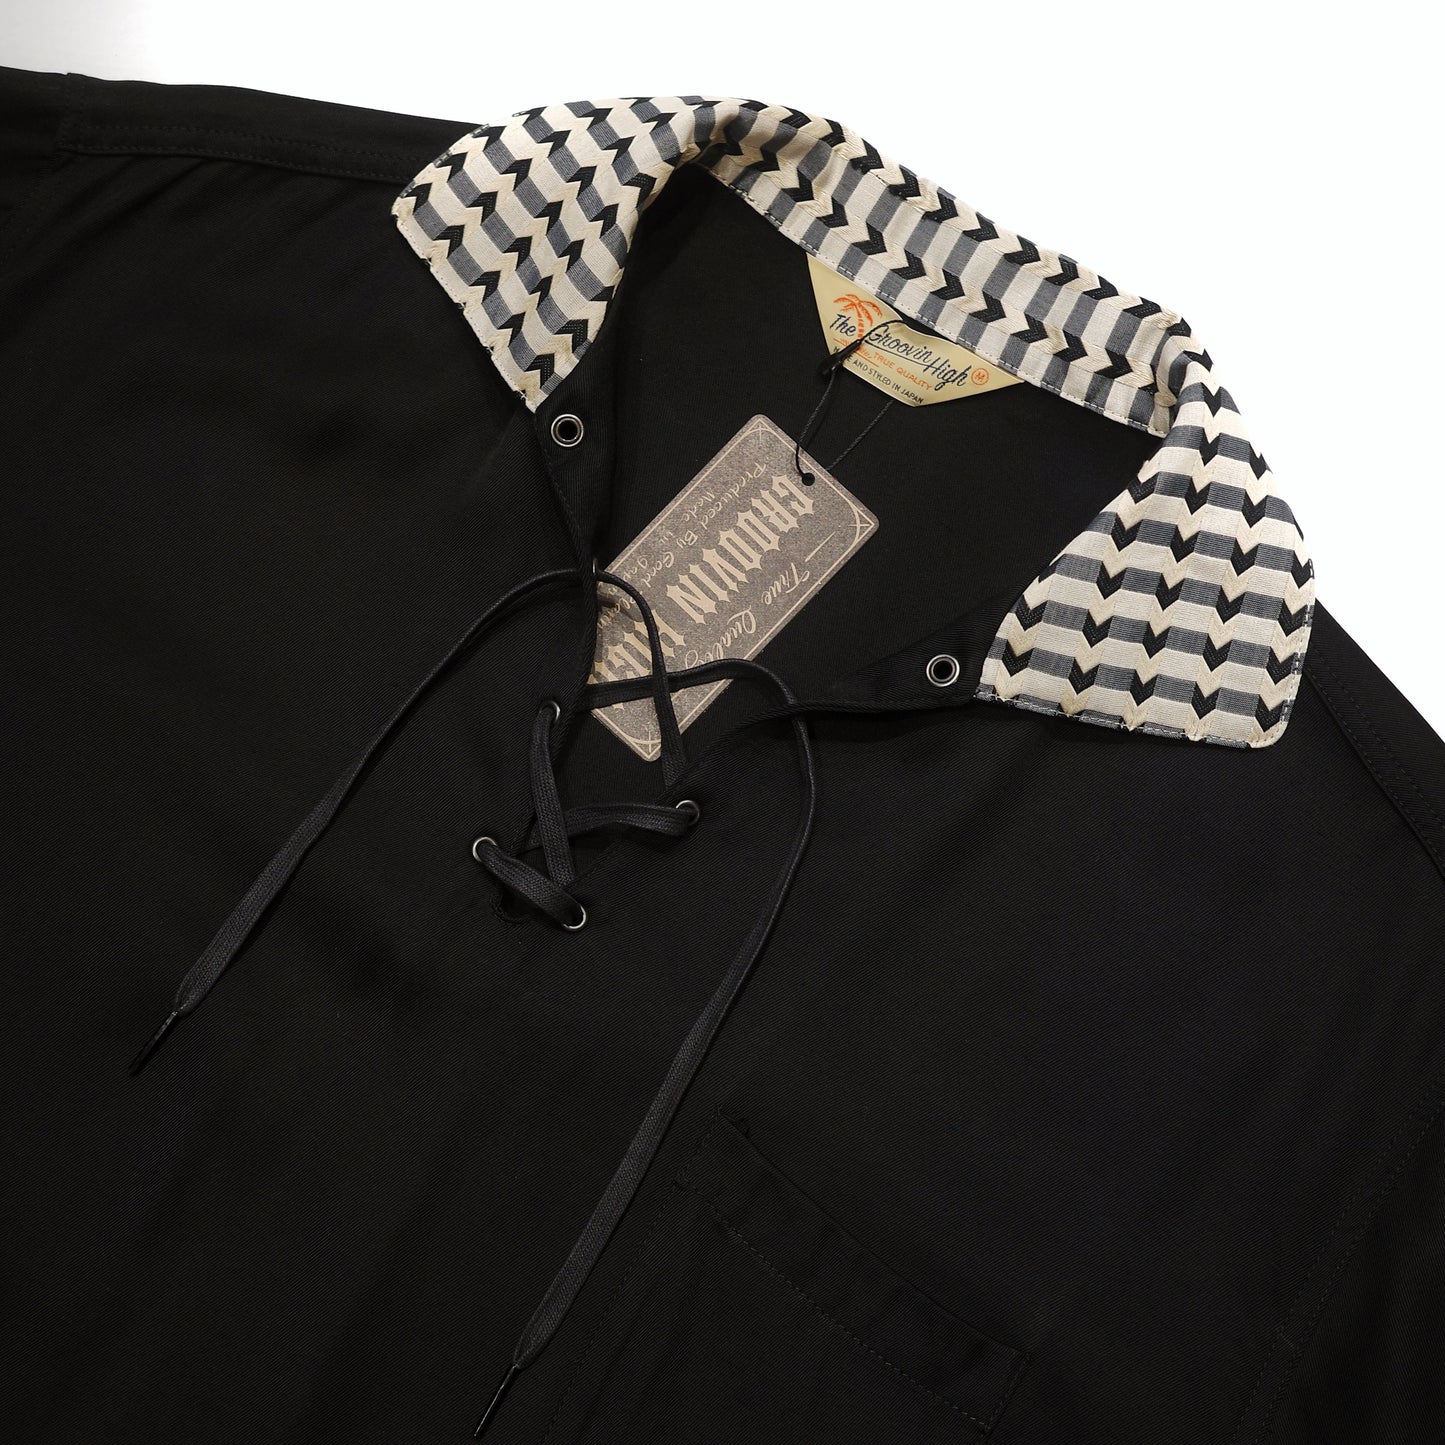 The Groovin High - Lot.550 1950s Spindle Pullover Shirt (Black)